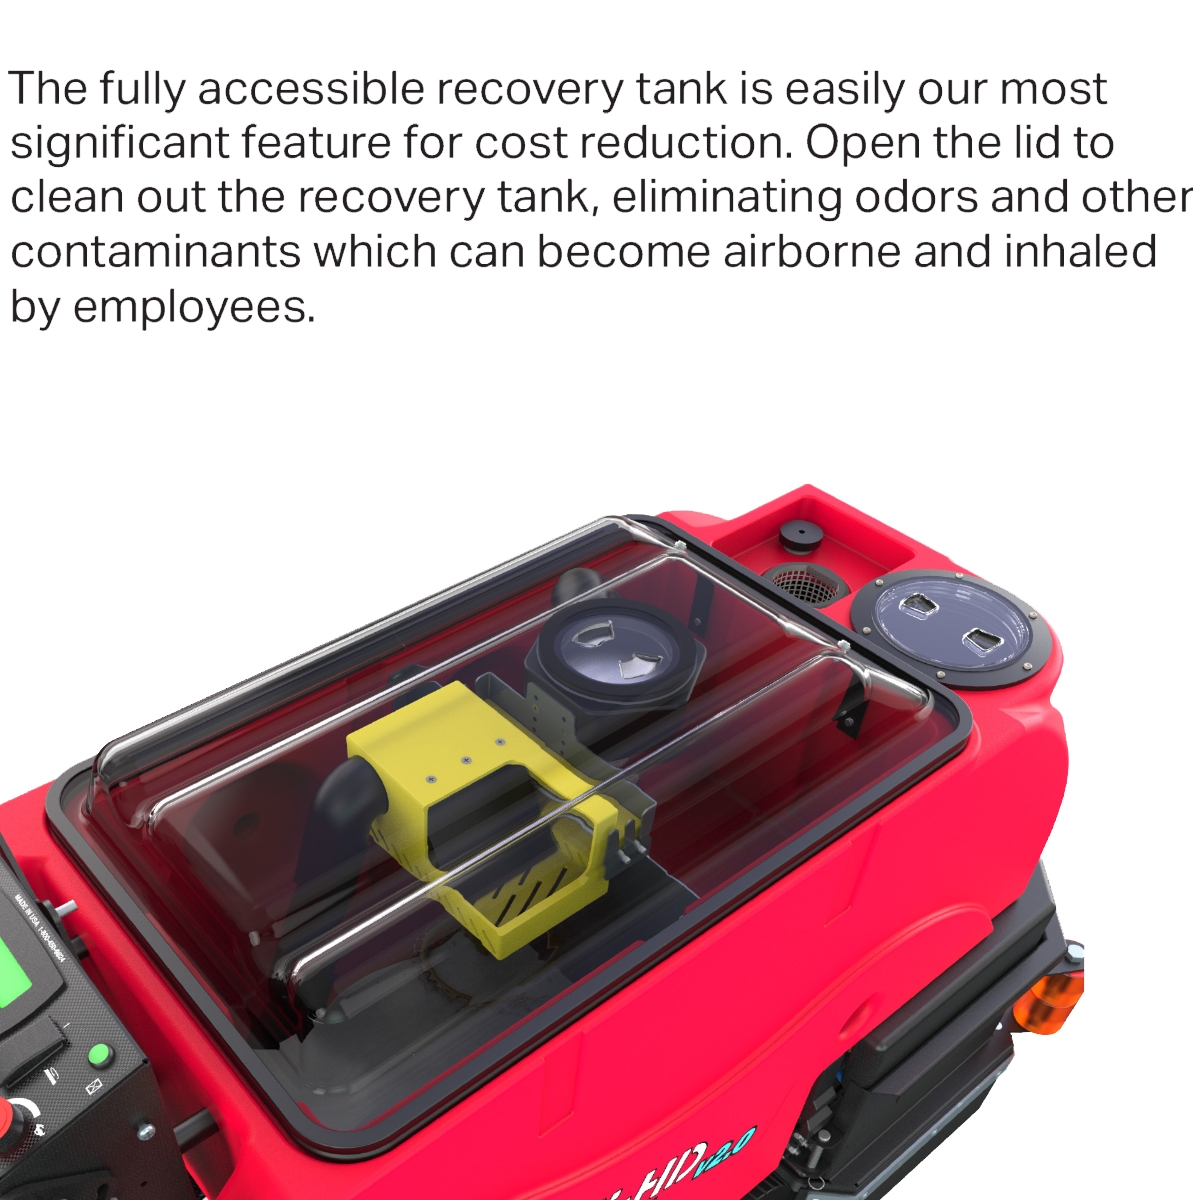 The fully accessible recovery tank is shown on Southern Sweepers Factory Cat Micro-HD